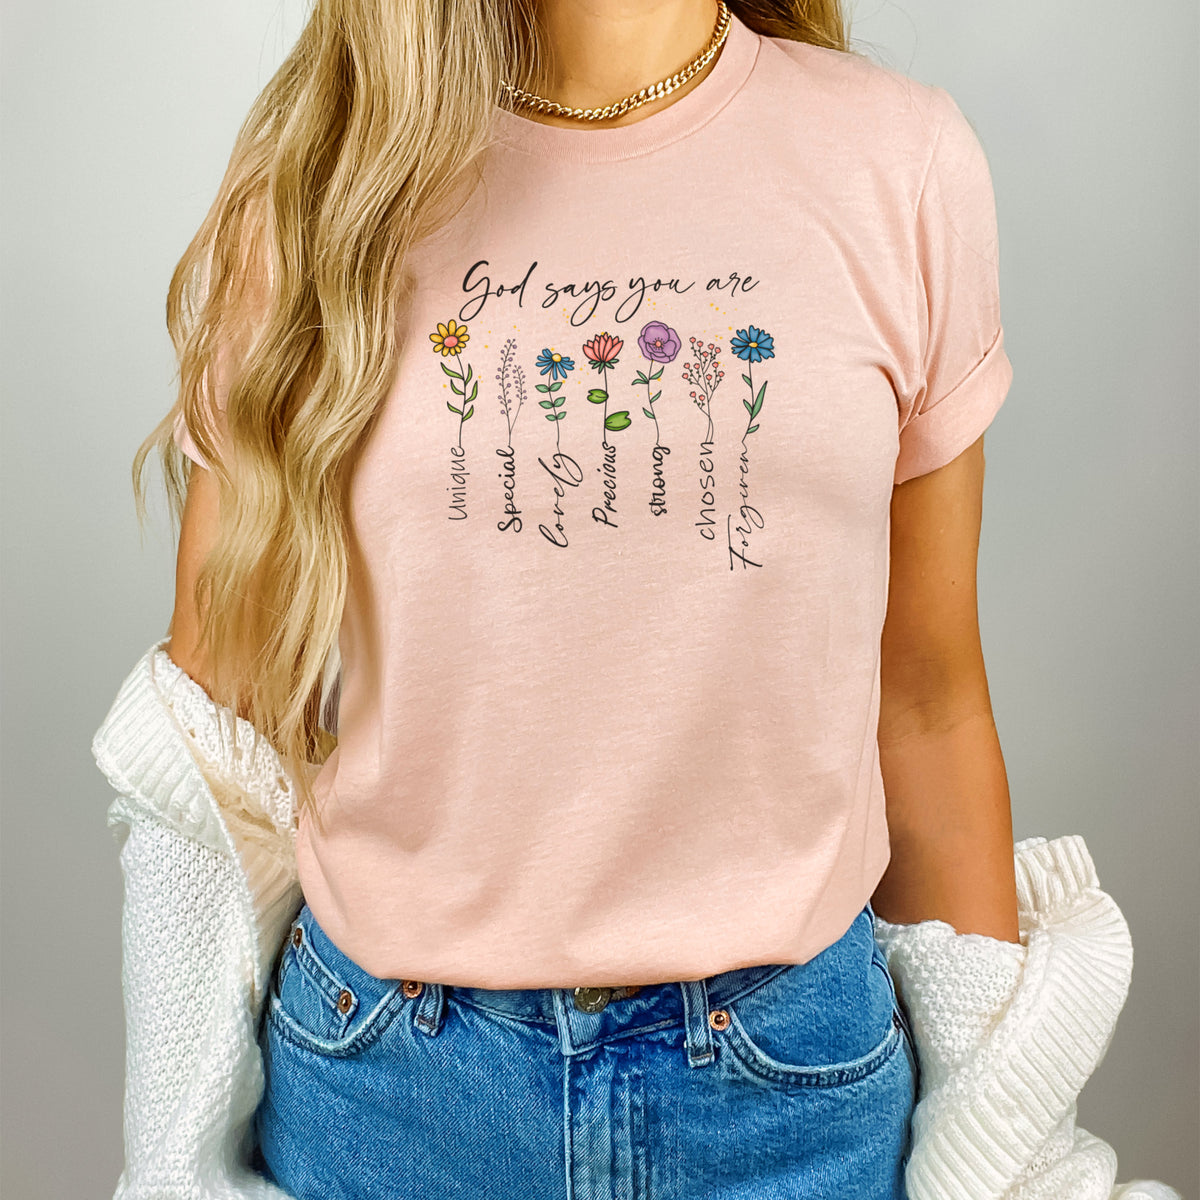 God Says You Are Strong... Floral Design - Women's Christian T-Shirt